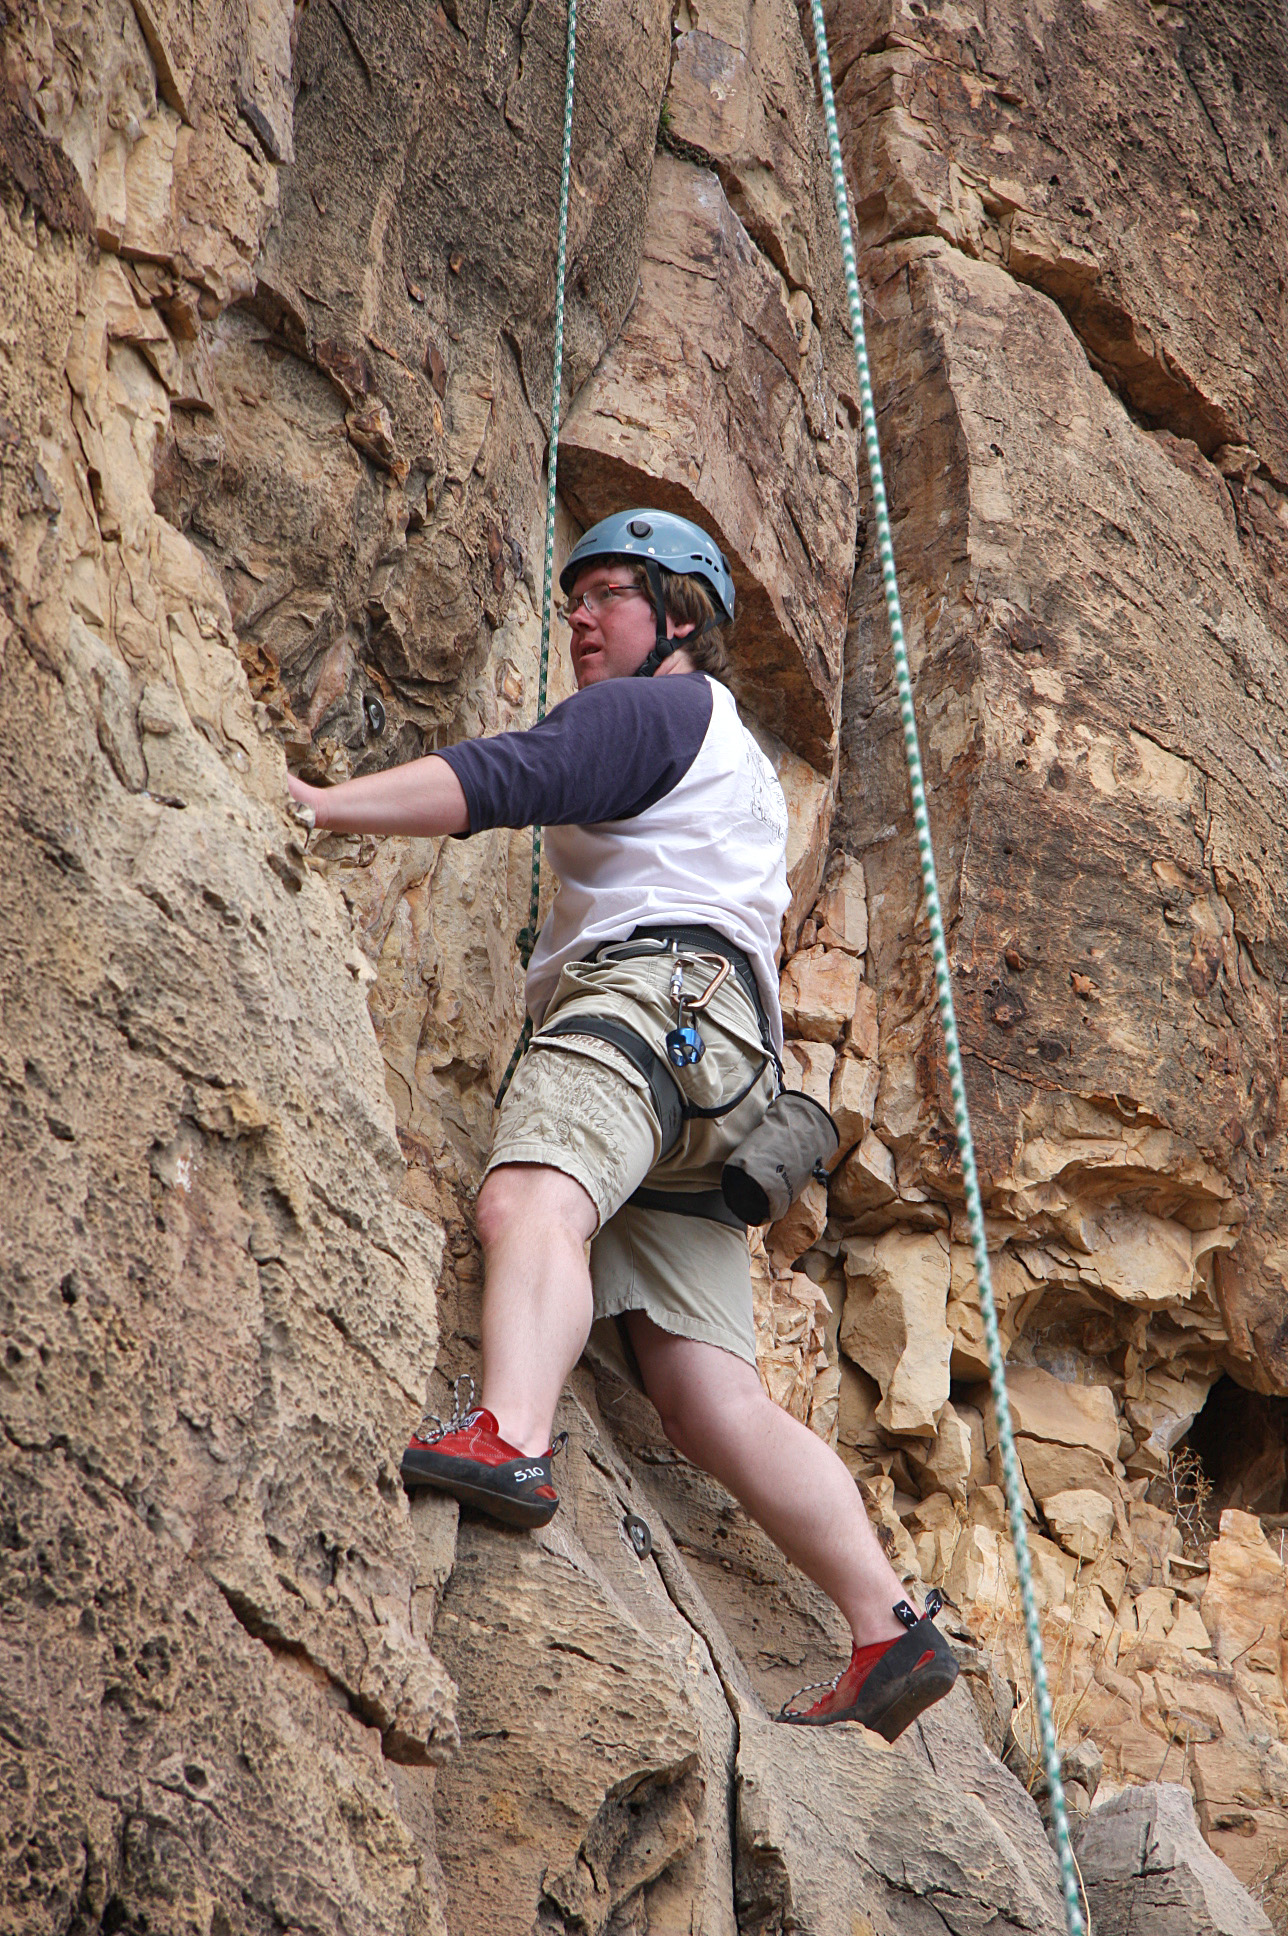 the man is climbing on the rope near some rock